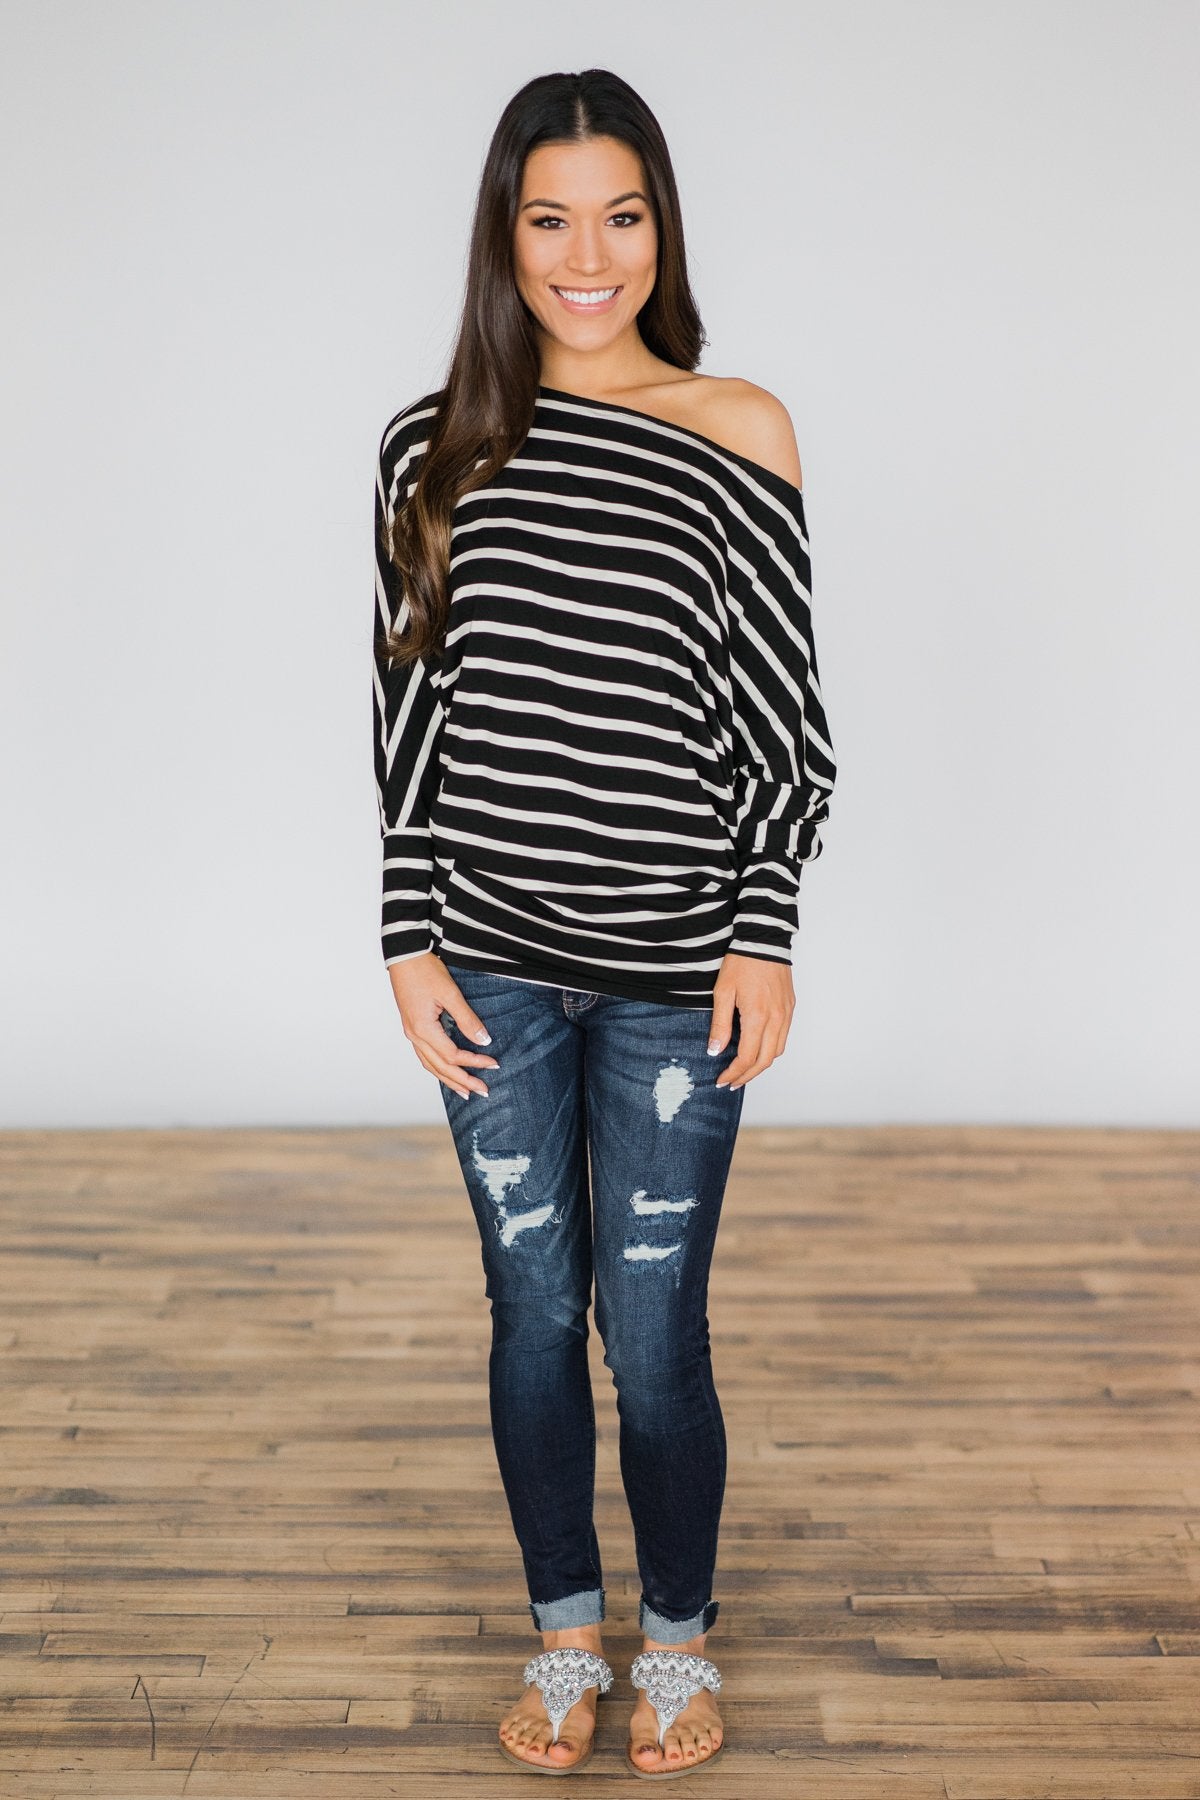 Captivated by Love Striped Top